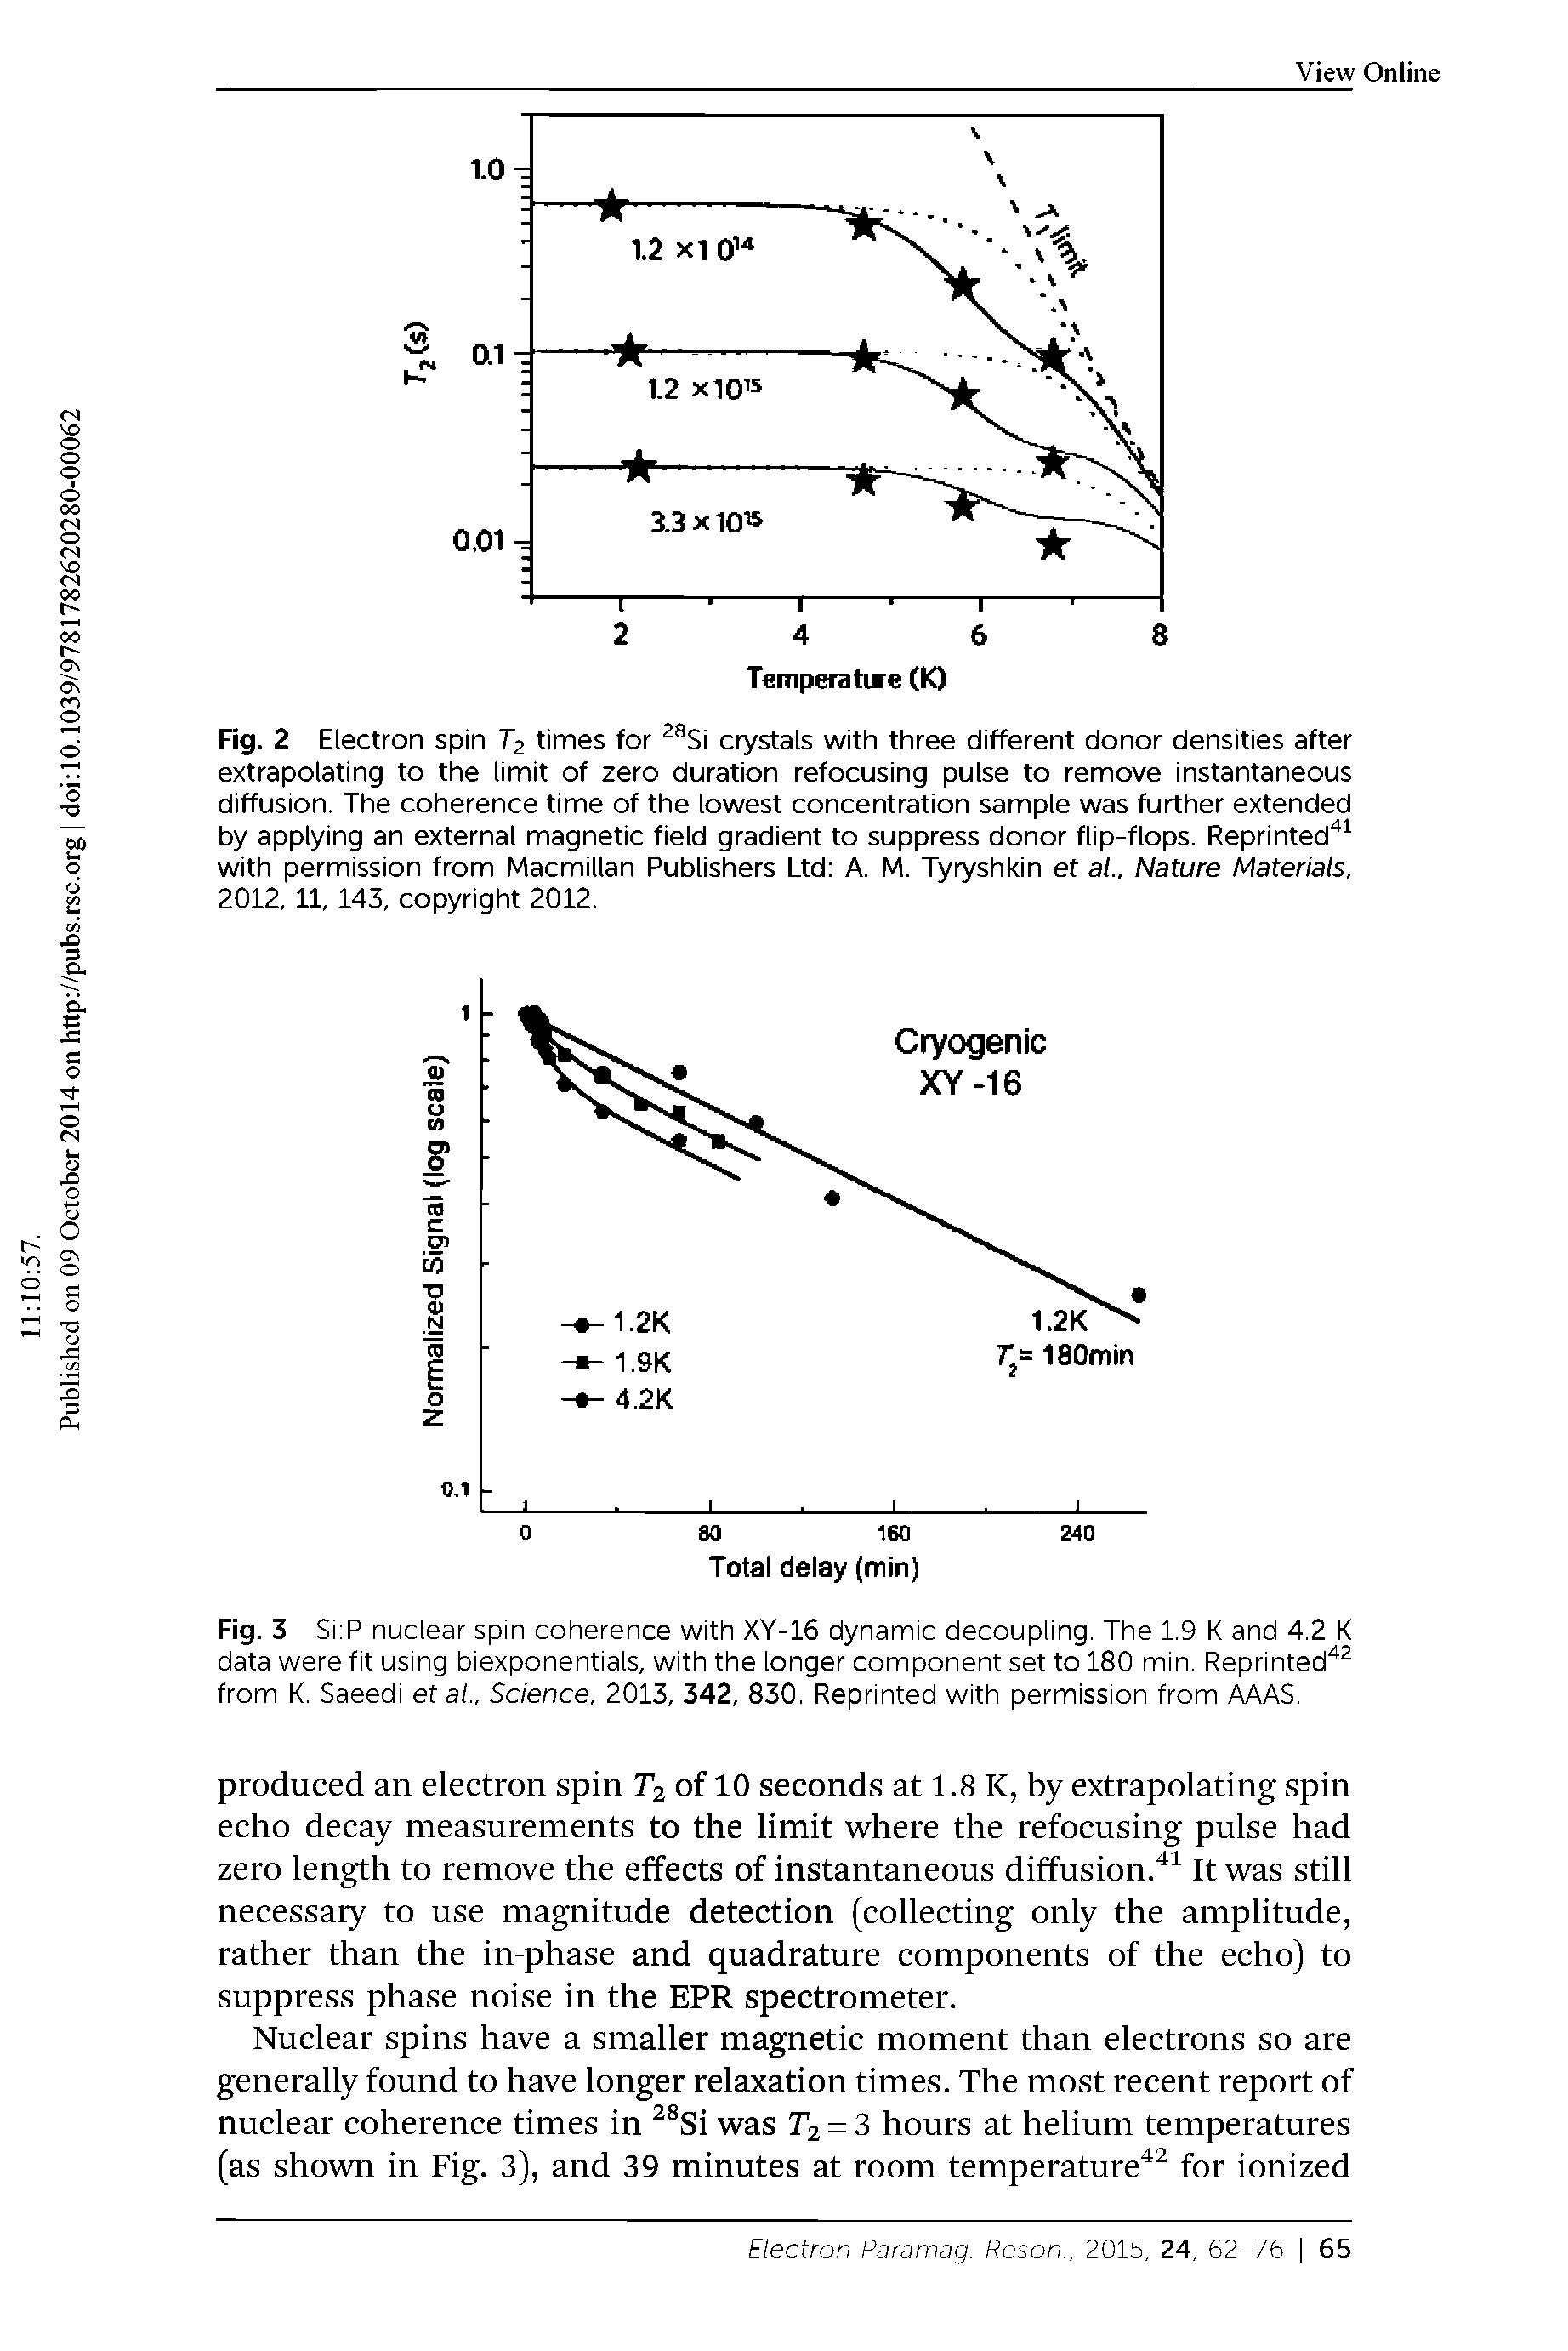 Fig. 3 S i P nuclear spin coherence with XY-16 dynamic decoupling. The 1.9 K and 4.2 K data were fit using biexponentials, with the longer component set to 180 min. Reprinted" from K. Saeedi eta/.. Science, 2013, 342, 830. Reprinted with permission from AAAS.